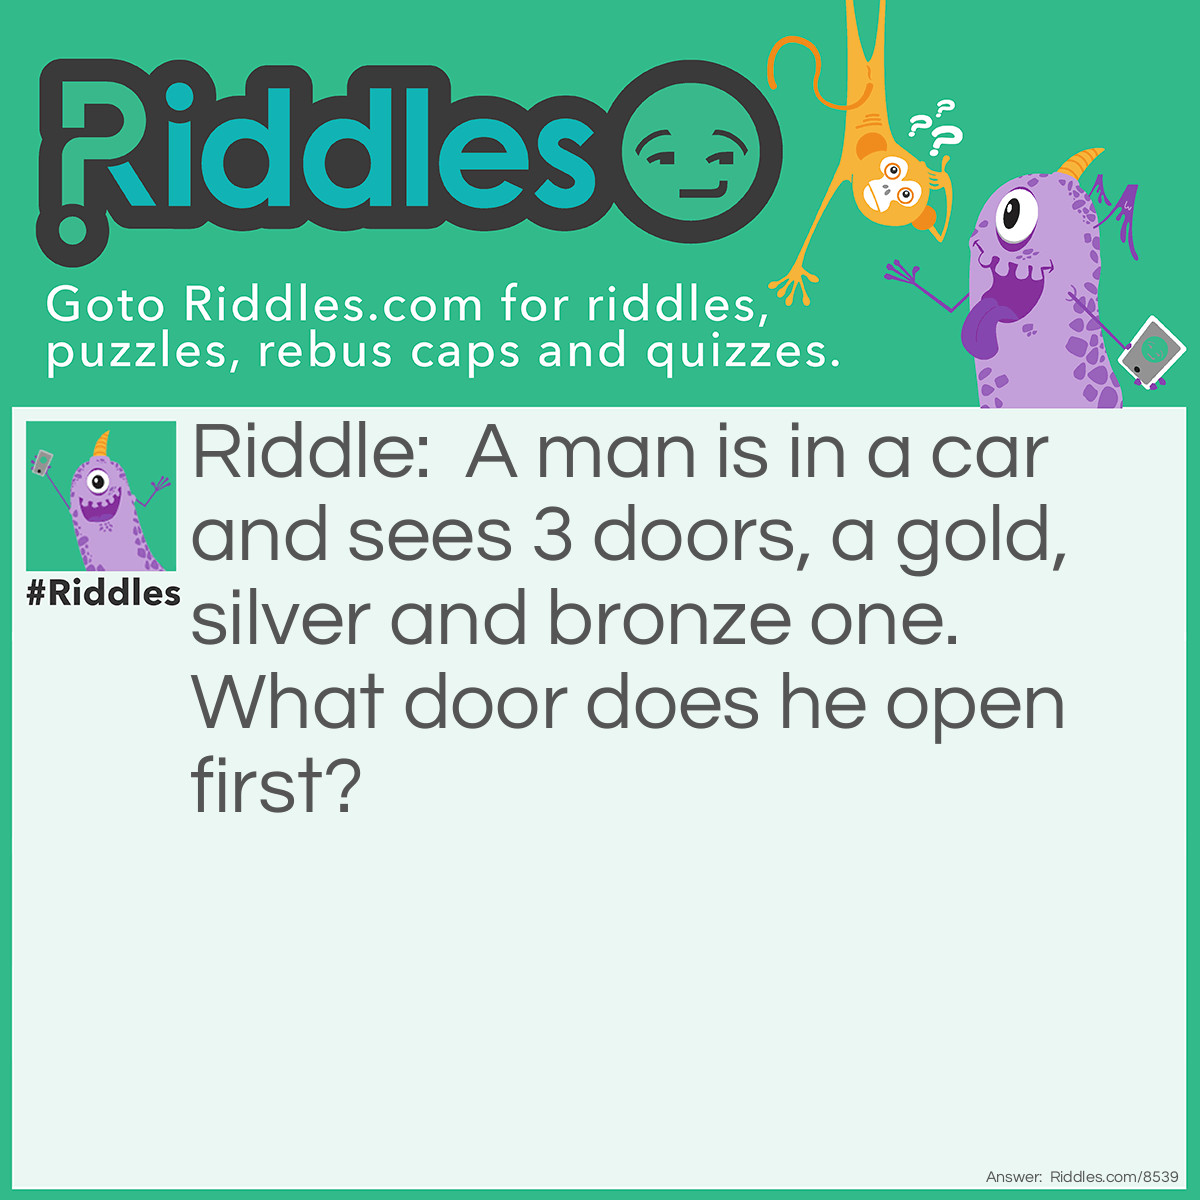 Riddle: A man is in a car and sees 3 doors, a gold, silver and bronze one. What door does he open first? Answer: The car door!